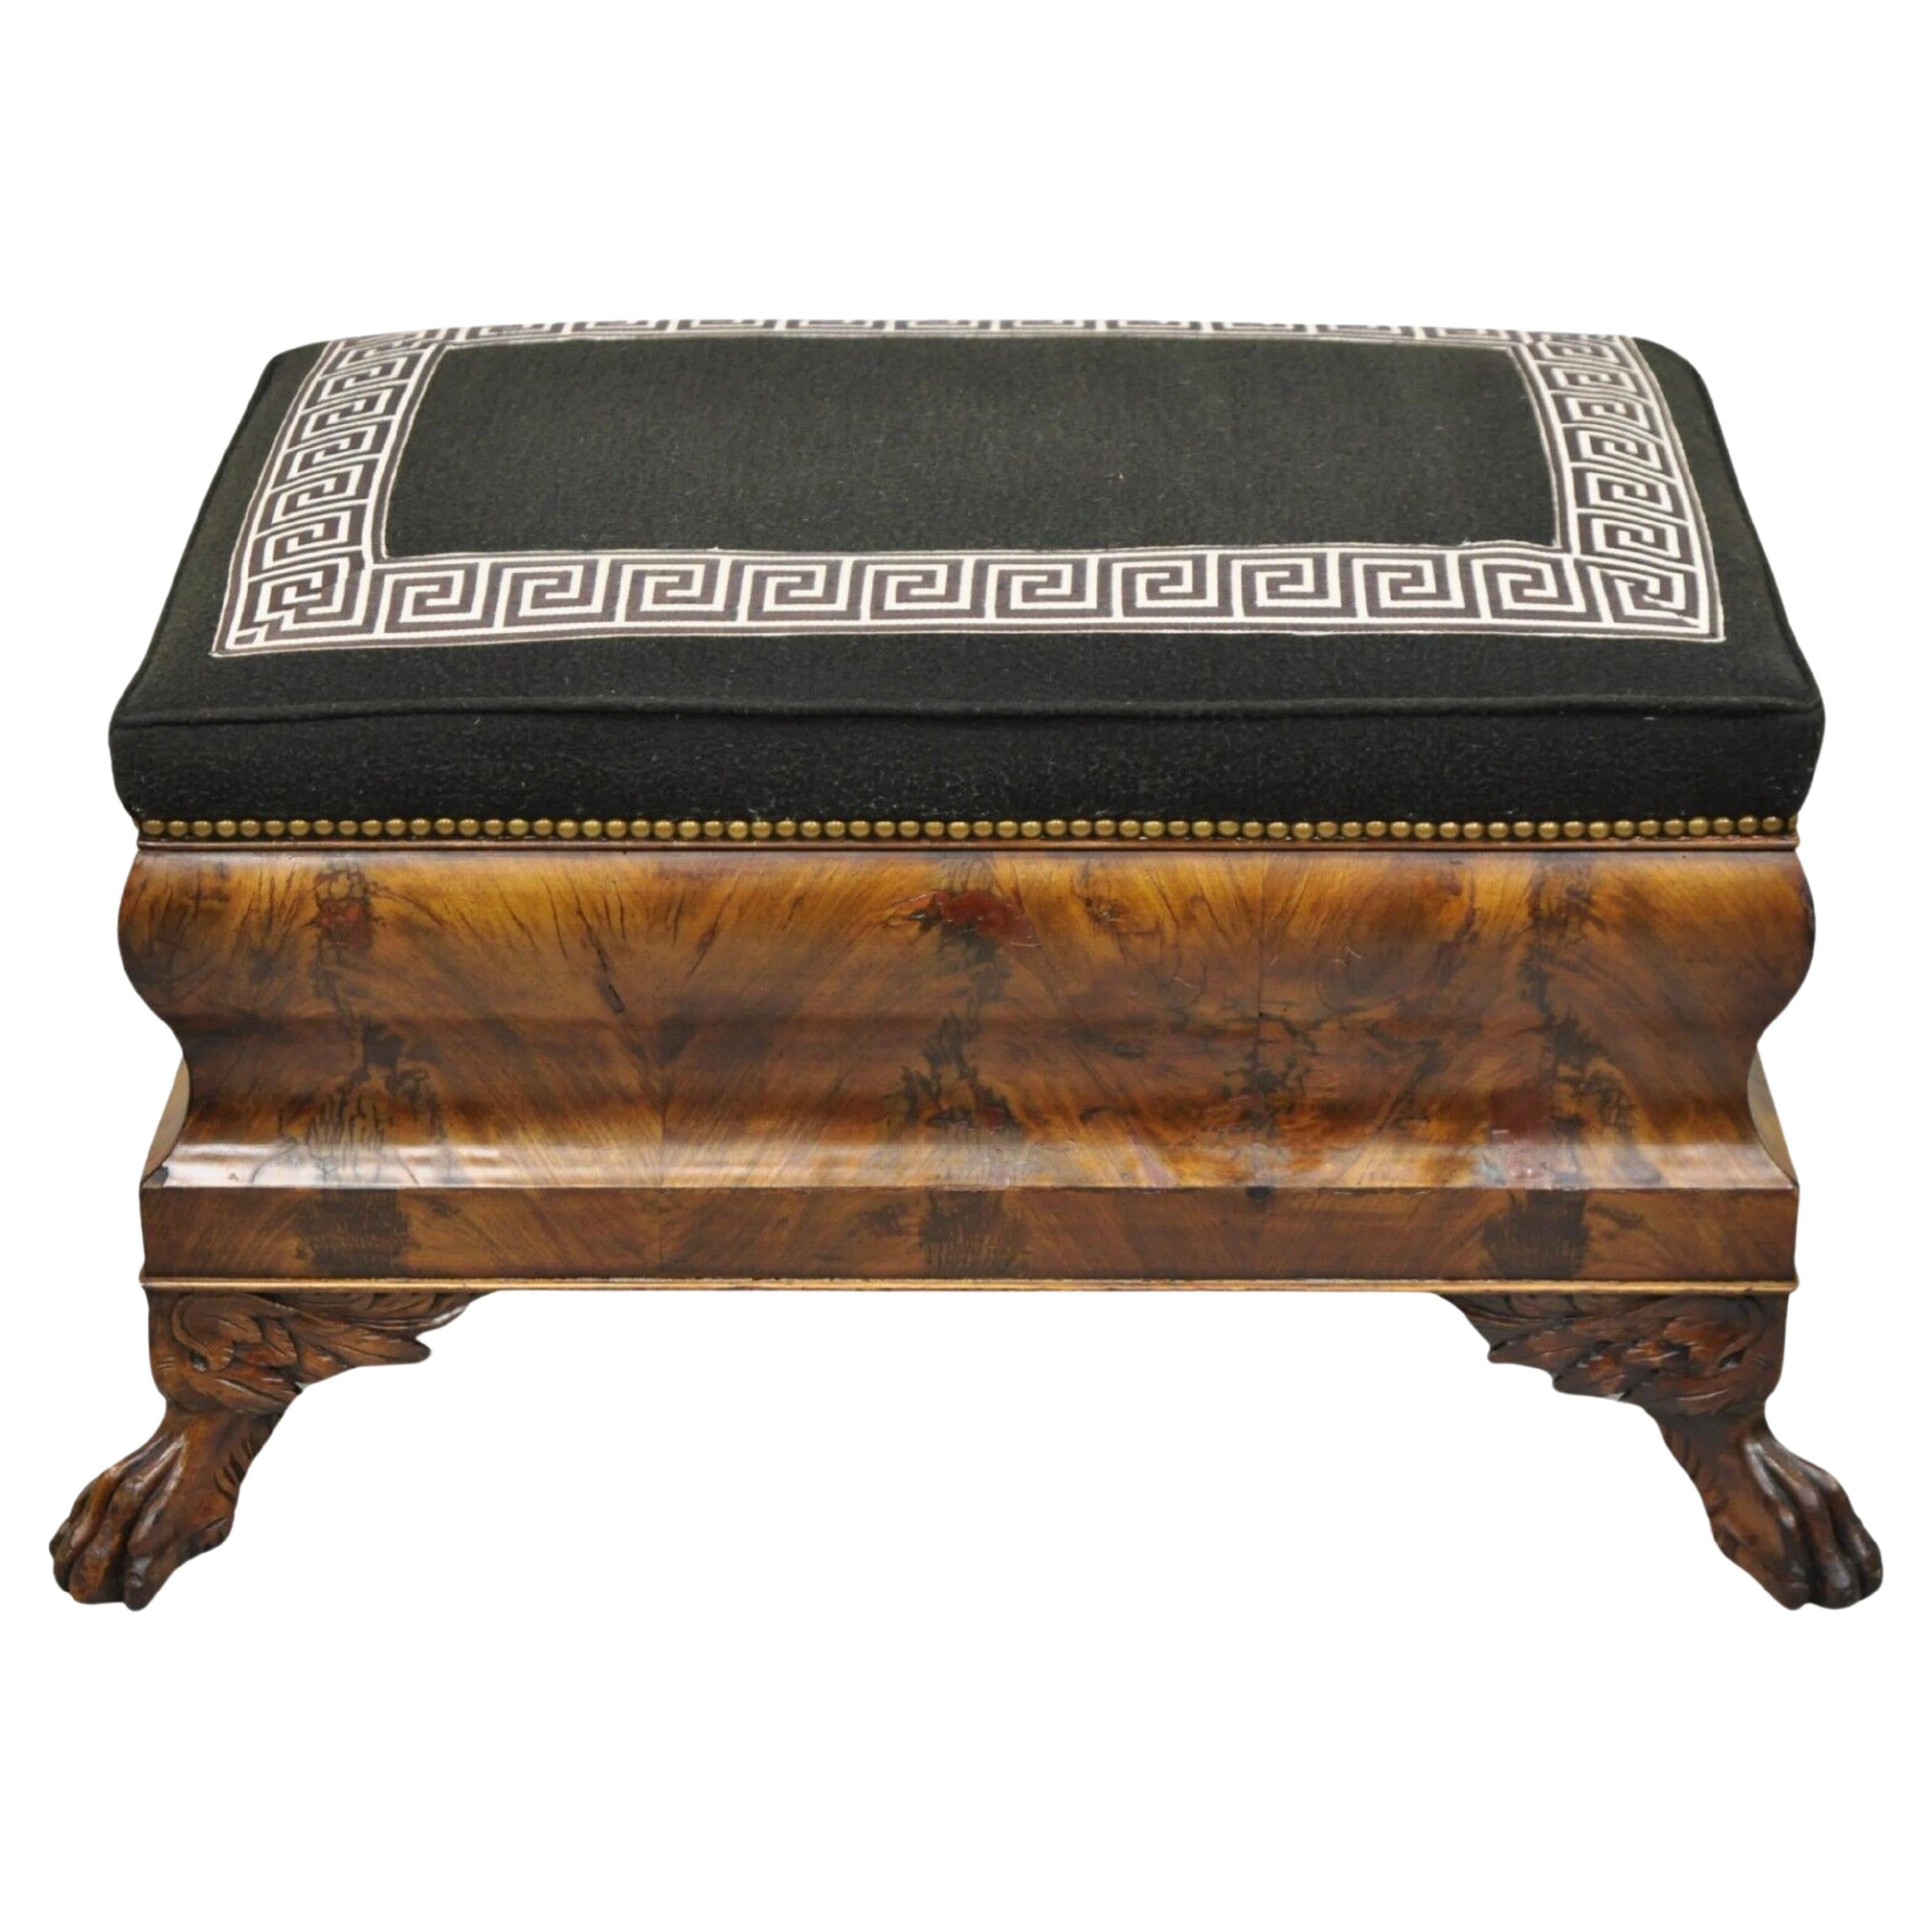 19th C. American Empire Carved Winged Paw Foot Mahogany Large Box Stool Ottoman For Sale